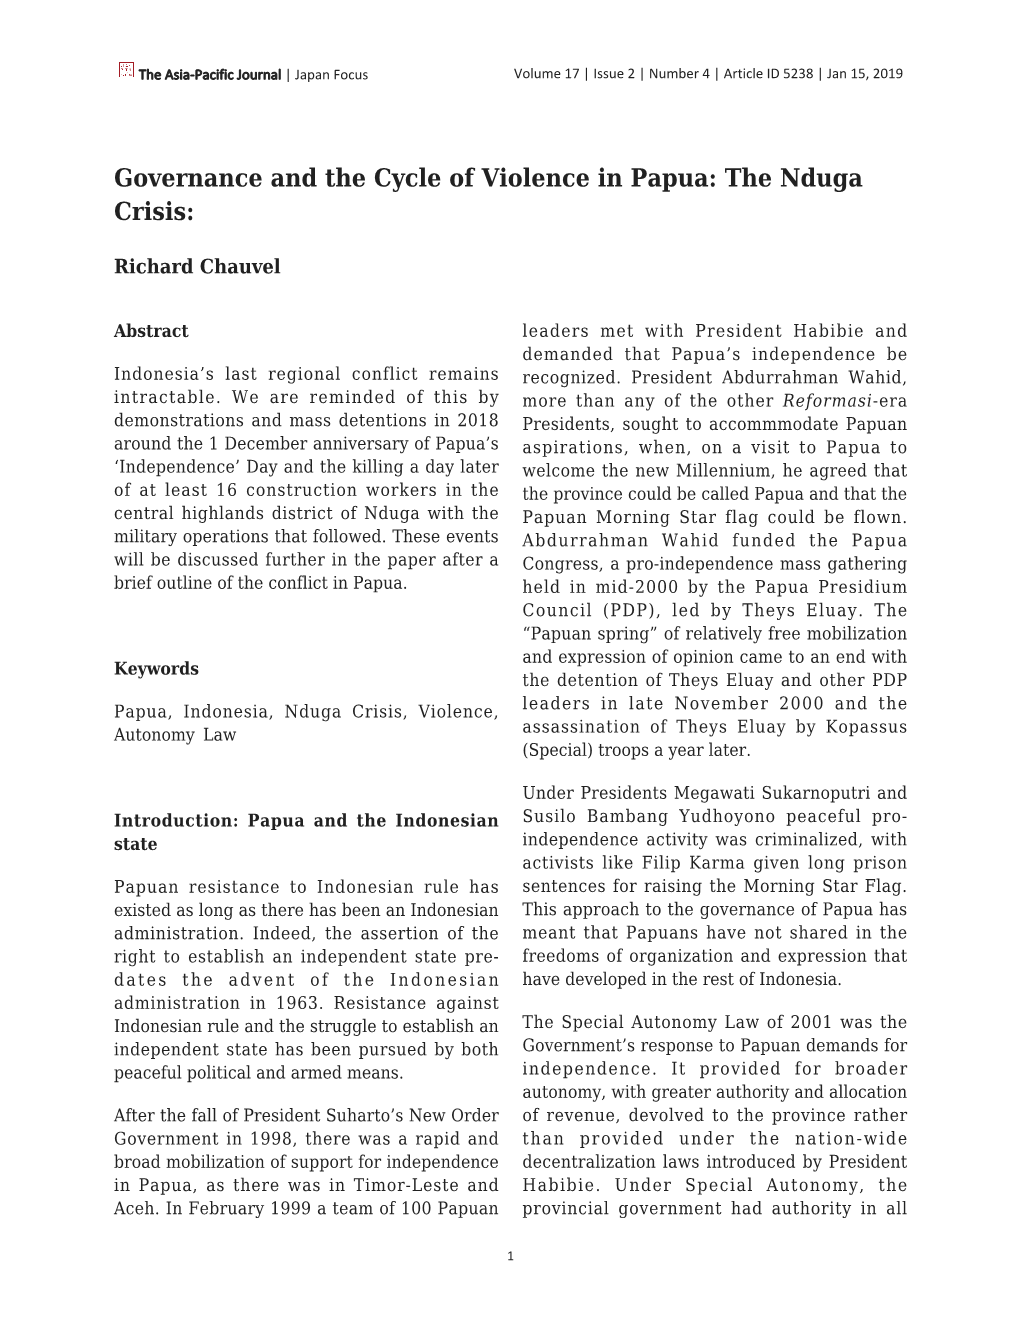 Governance and the Cycle of Violence in Papua: the Nduga Crisis